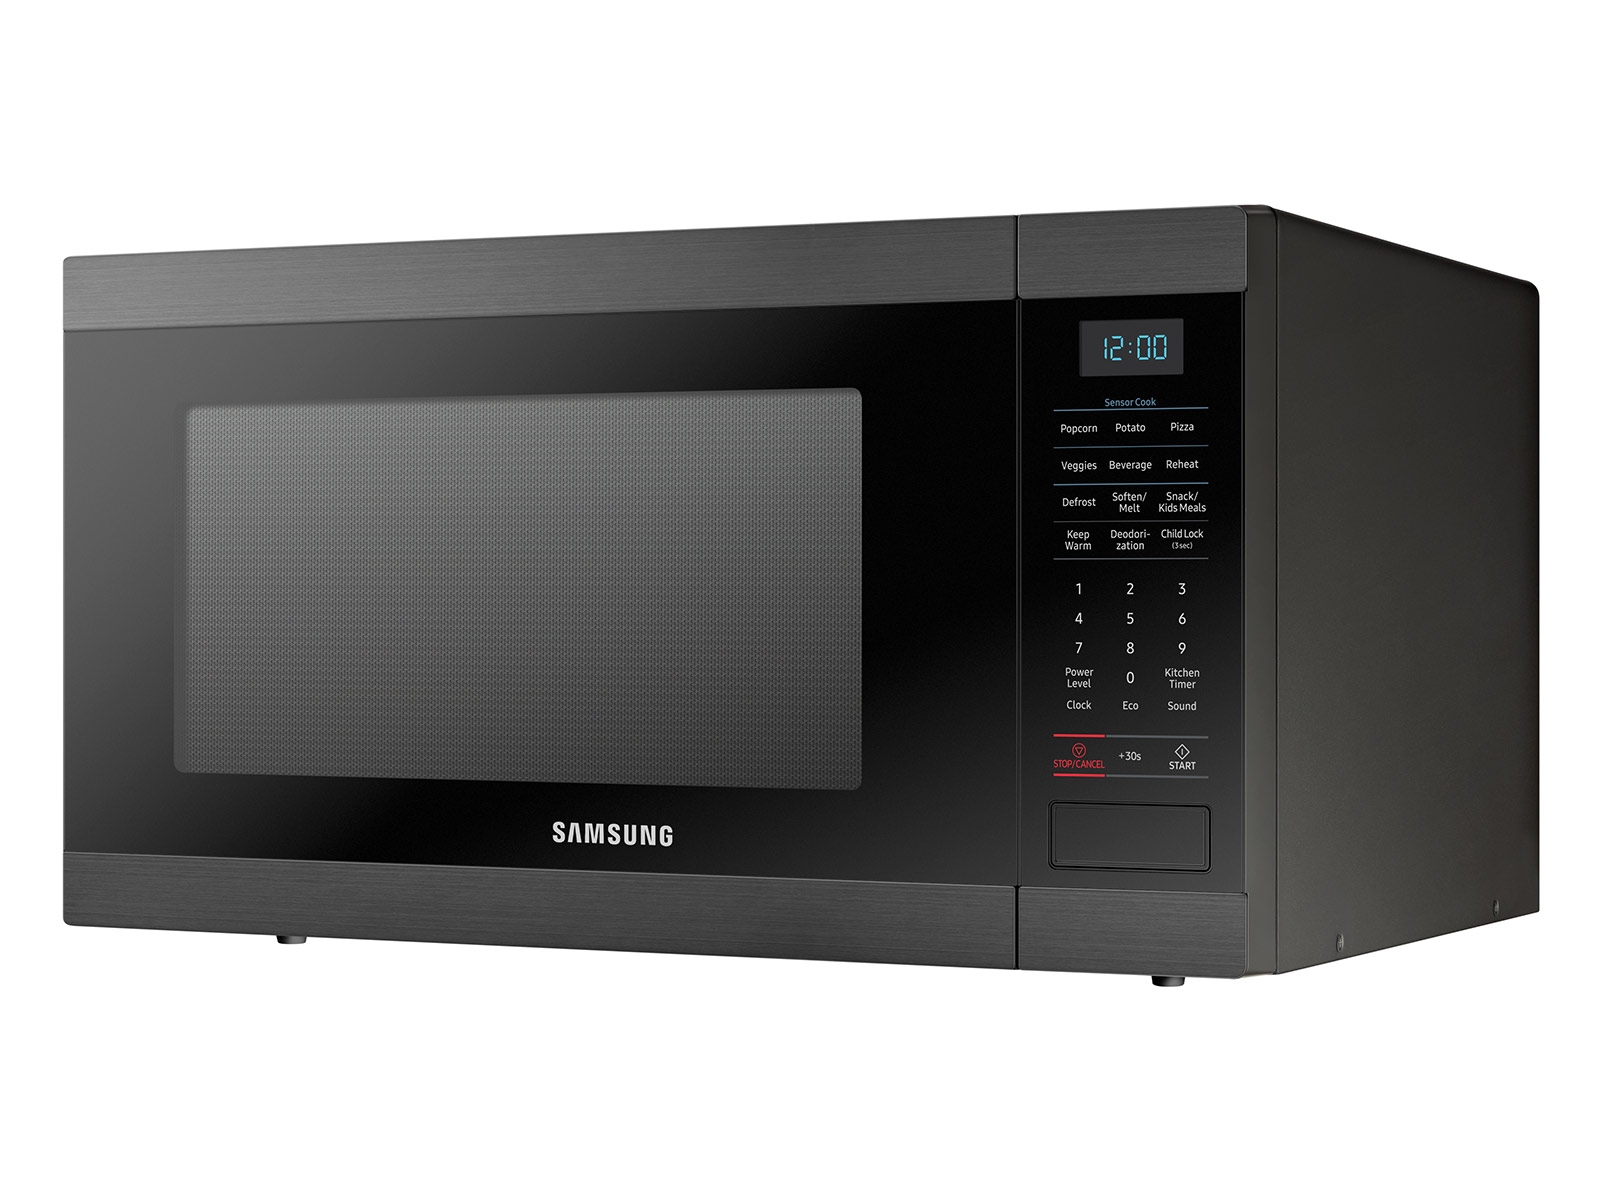 https://image-us.samsung.com/SamsungUS/home/home-appliances/microwaves/countertop/pdp/ms19m8000ag/gallery/020718/06_Microwave_MS19M8000AG_R-Perspective_Black.jpg?$product-details-jpg$